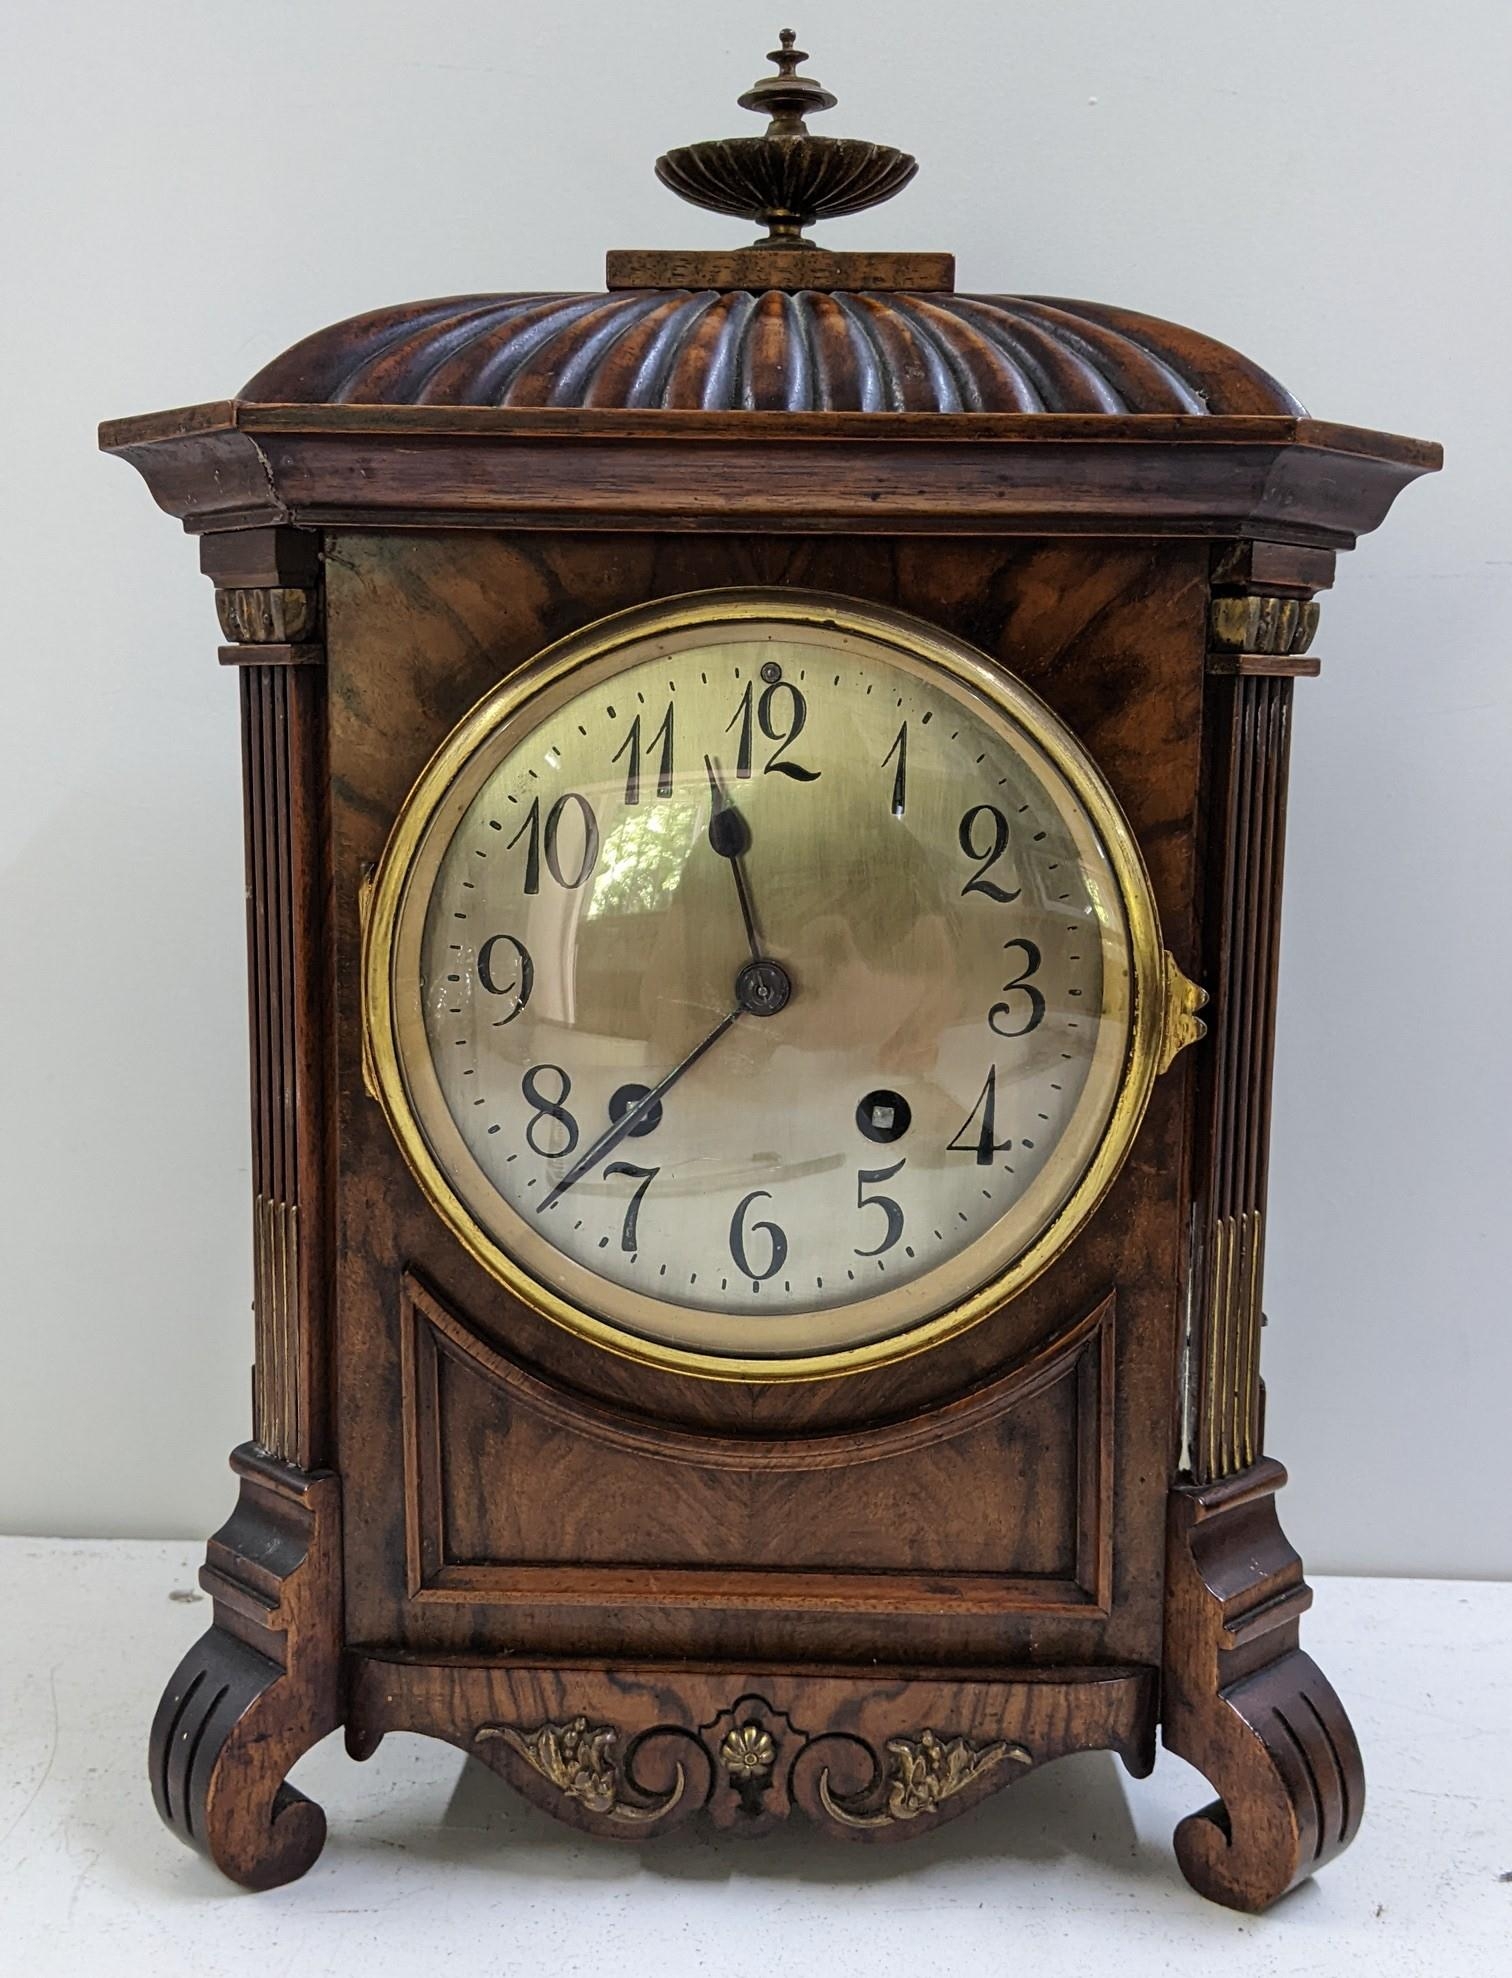 A circa 1900 German Lenzkirch mahogany cased 8 day mantle clock striking on a single gong, 35cmh x